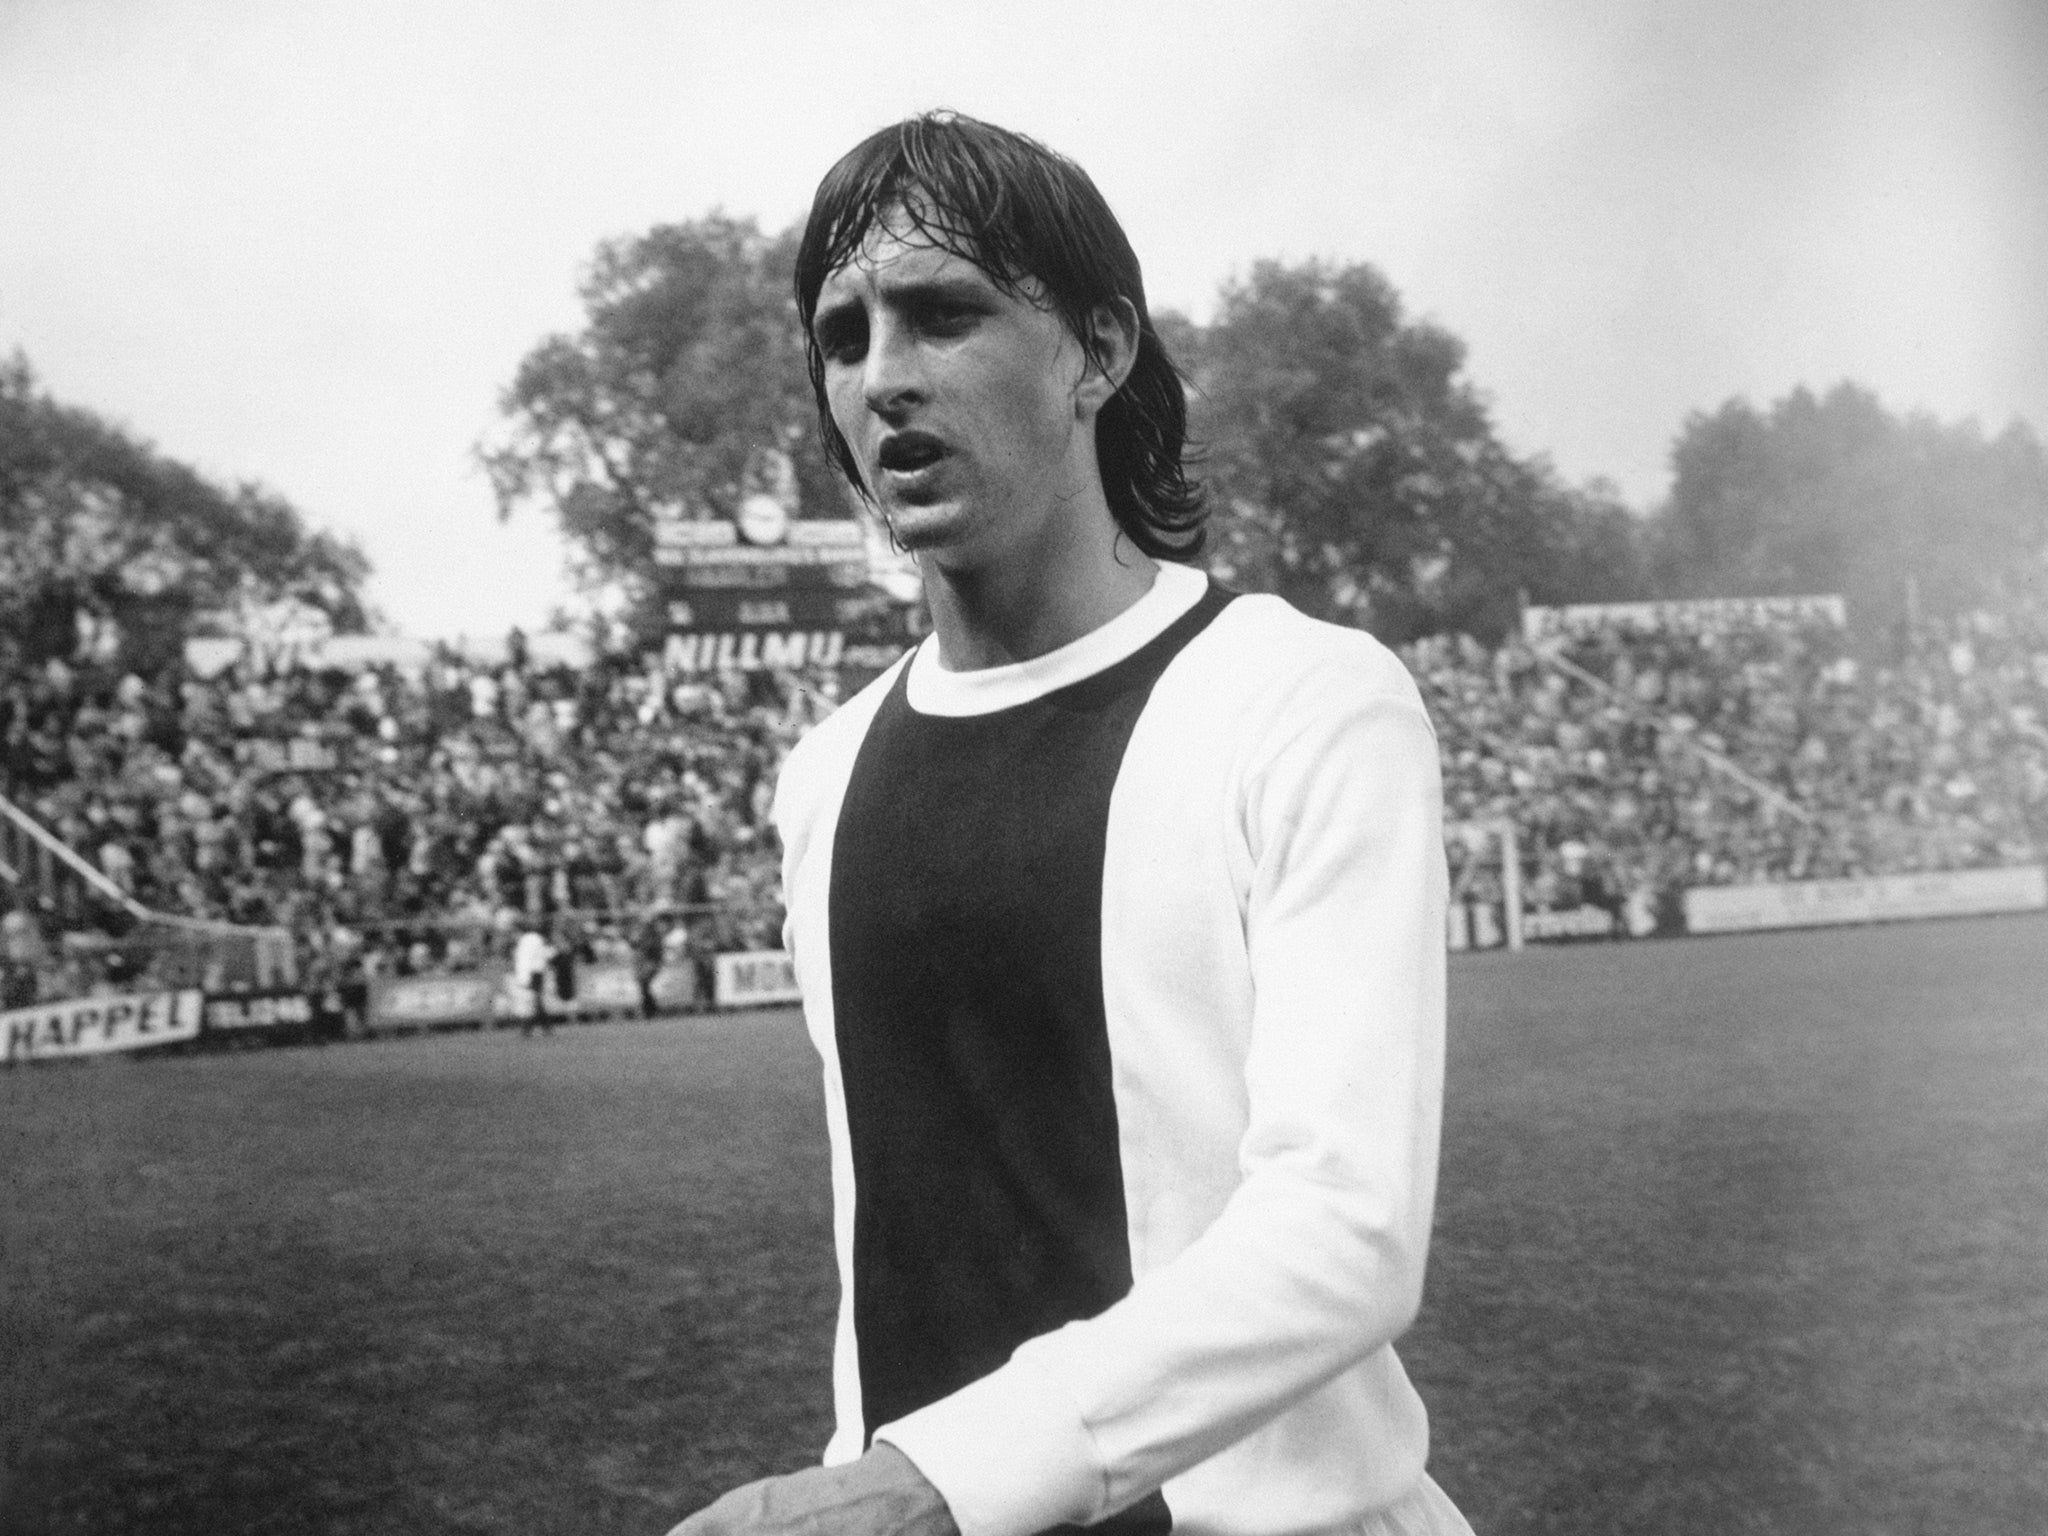 Johan Cruyff, pictured playing for Ajax in 1971